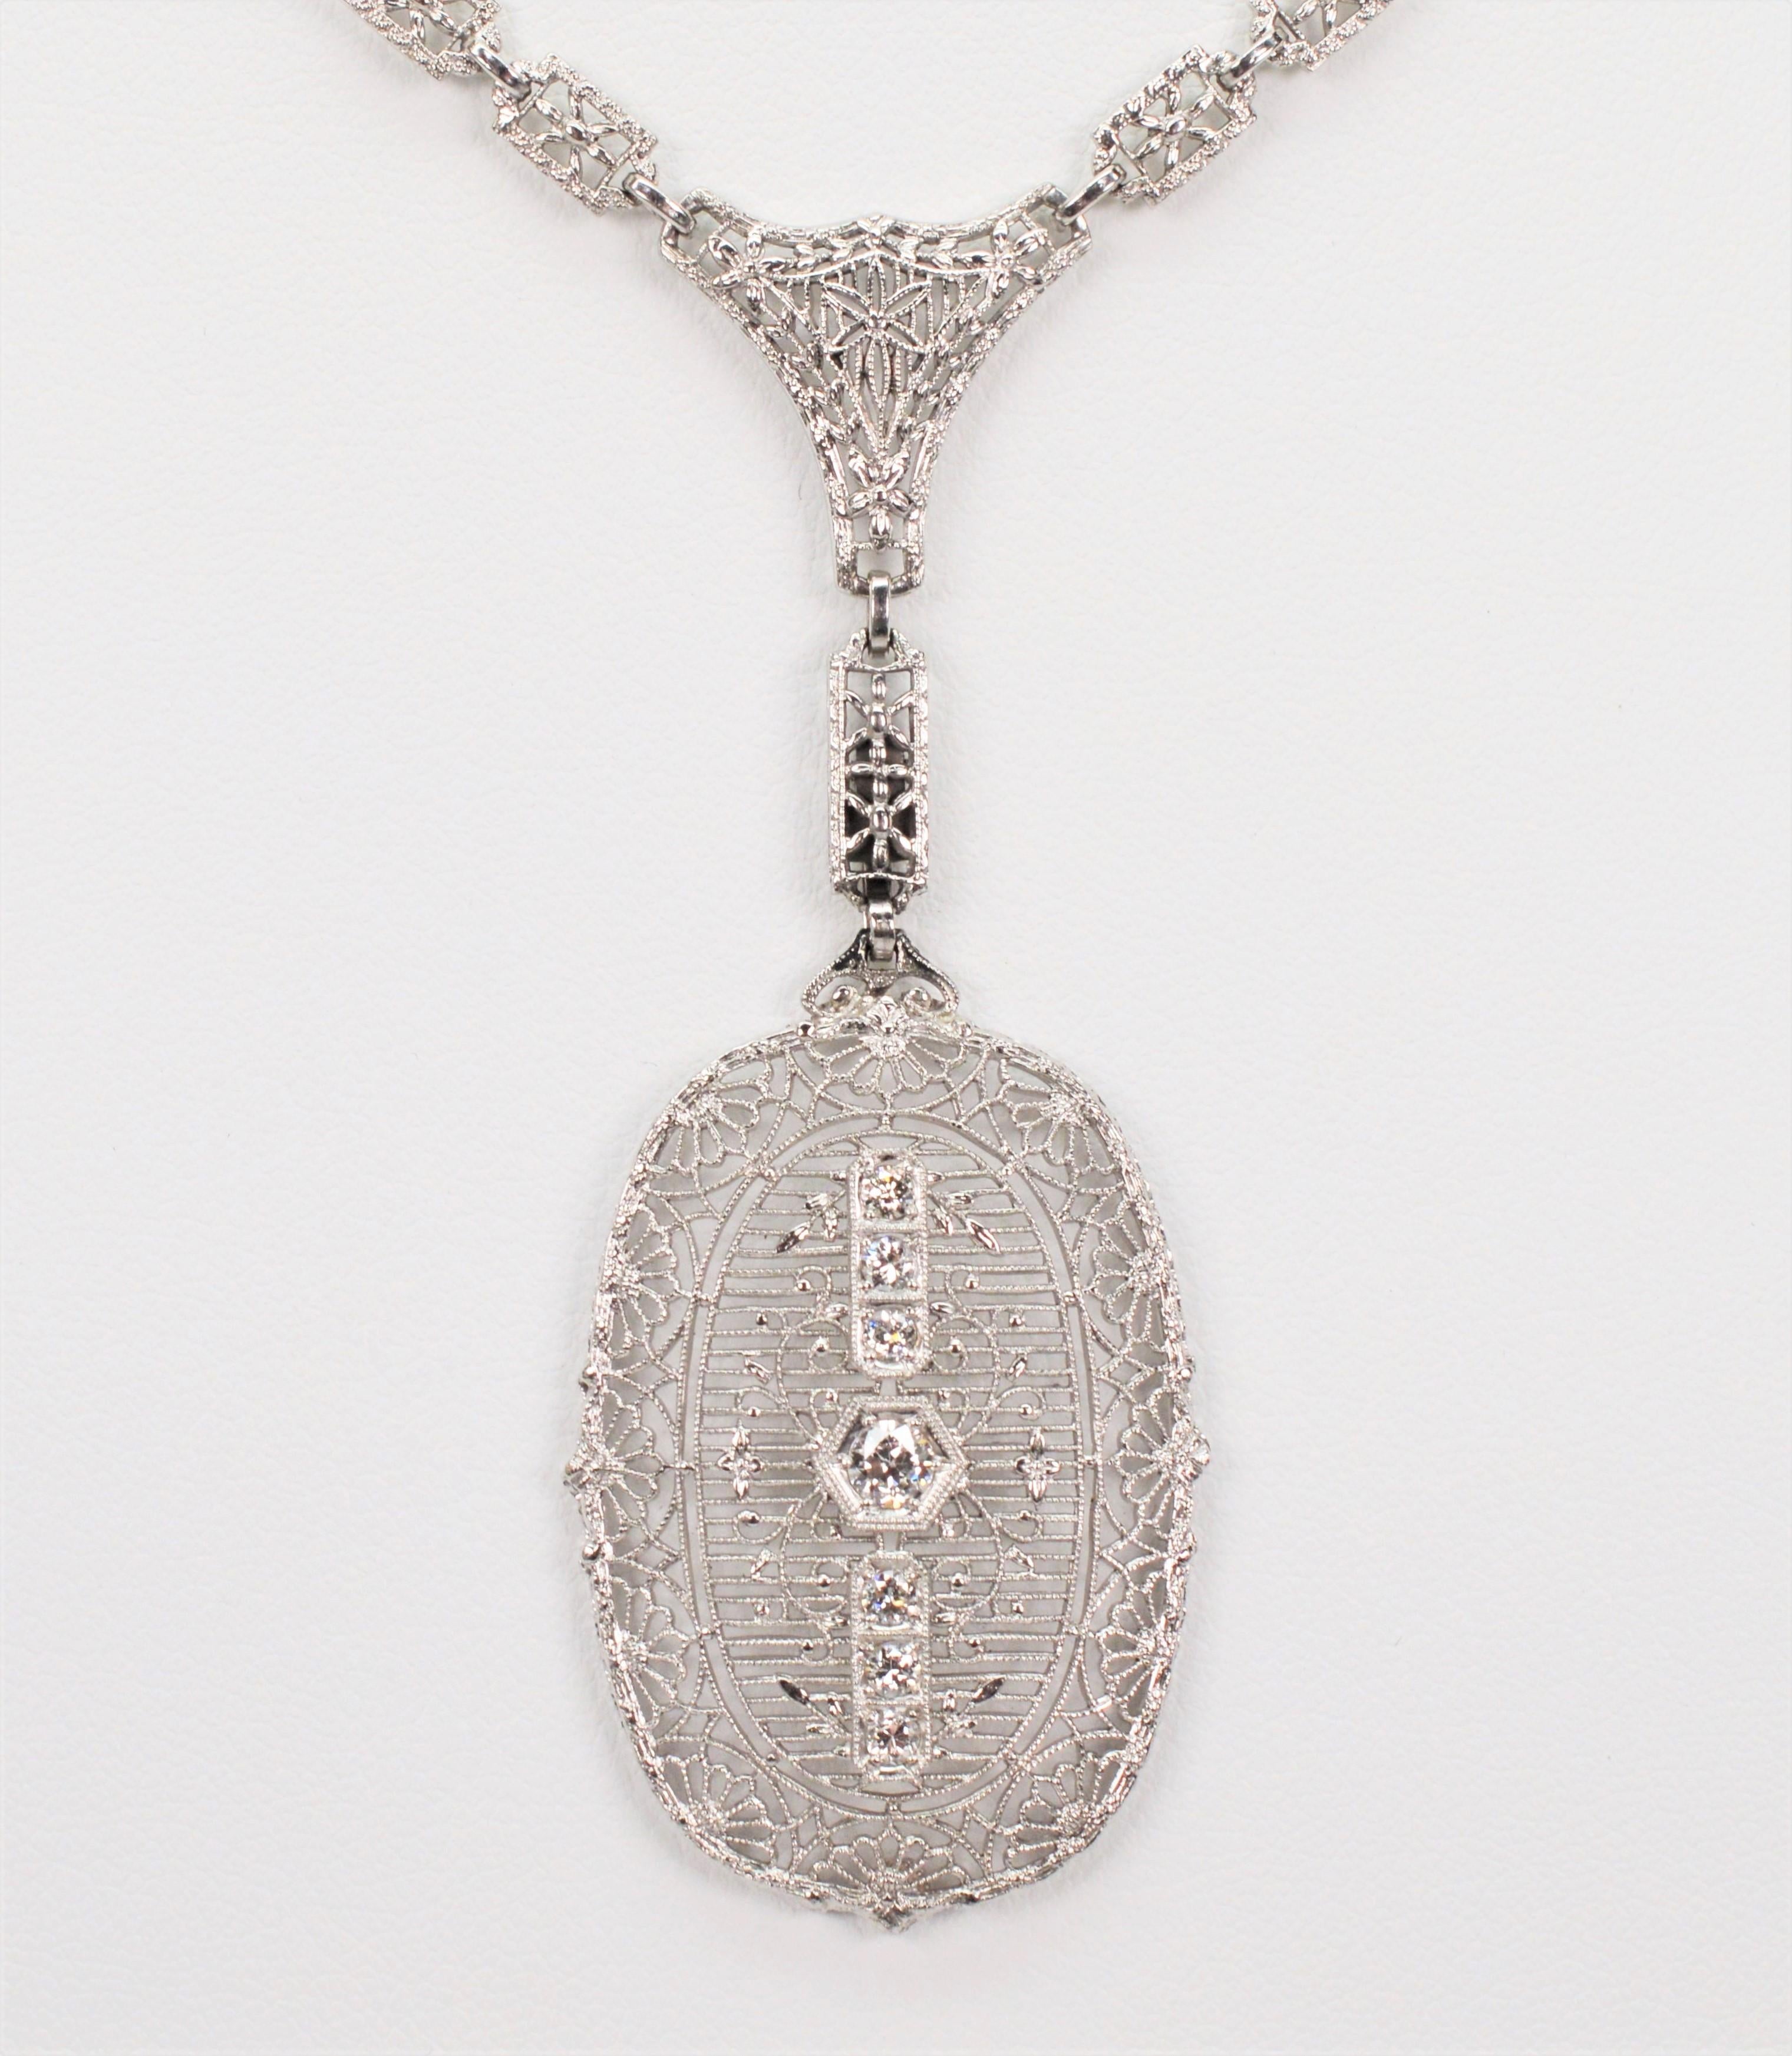 Five sparkling diamonds, .60 total carat weight , illuminate the intricate platinum and white gold filigree on this beautiful 1-5/8 inch oval pendant In the style of Edwardian finery, this stunning design is afixed and suspends from a 
period like